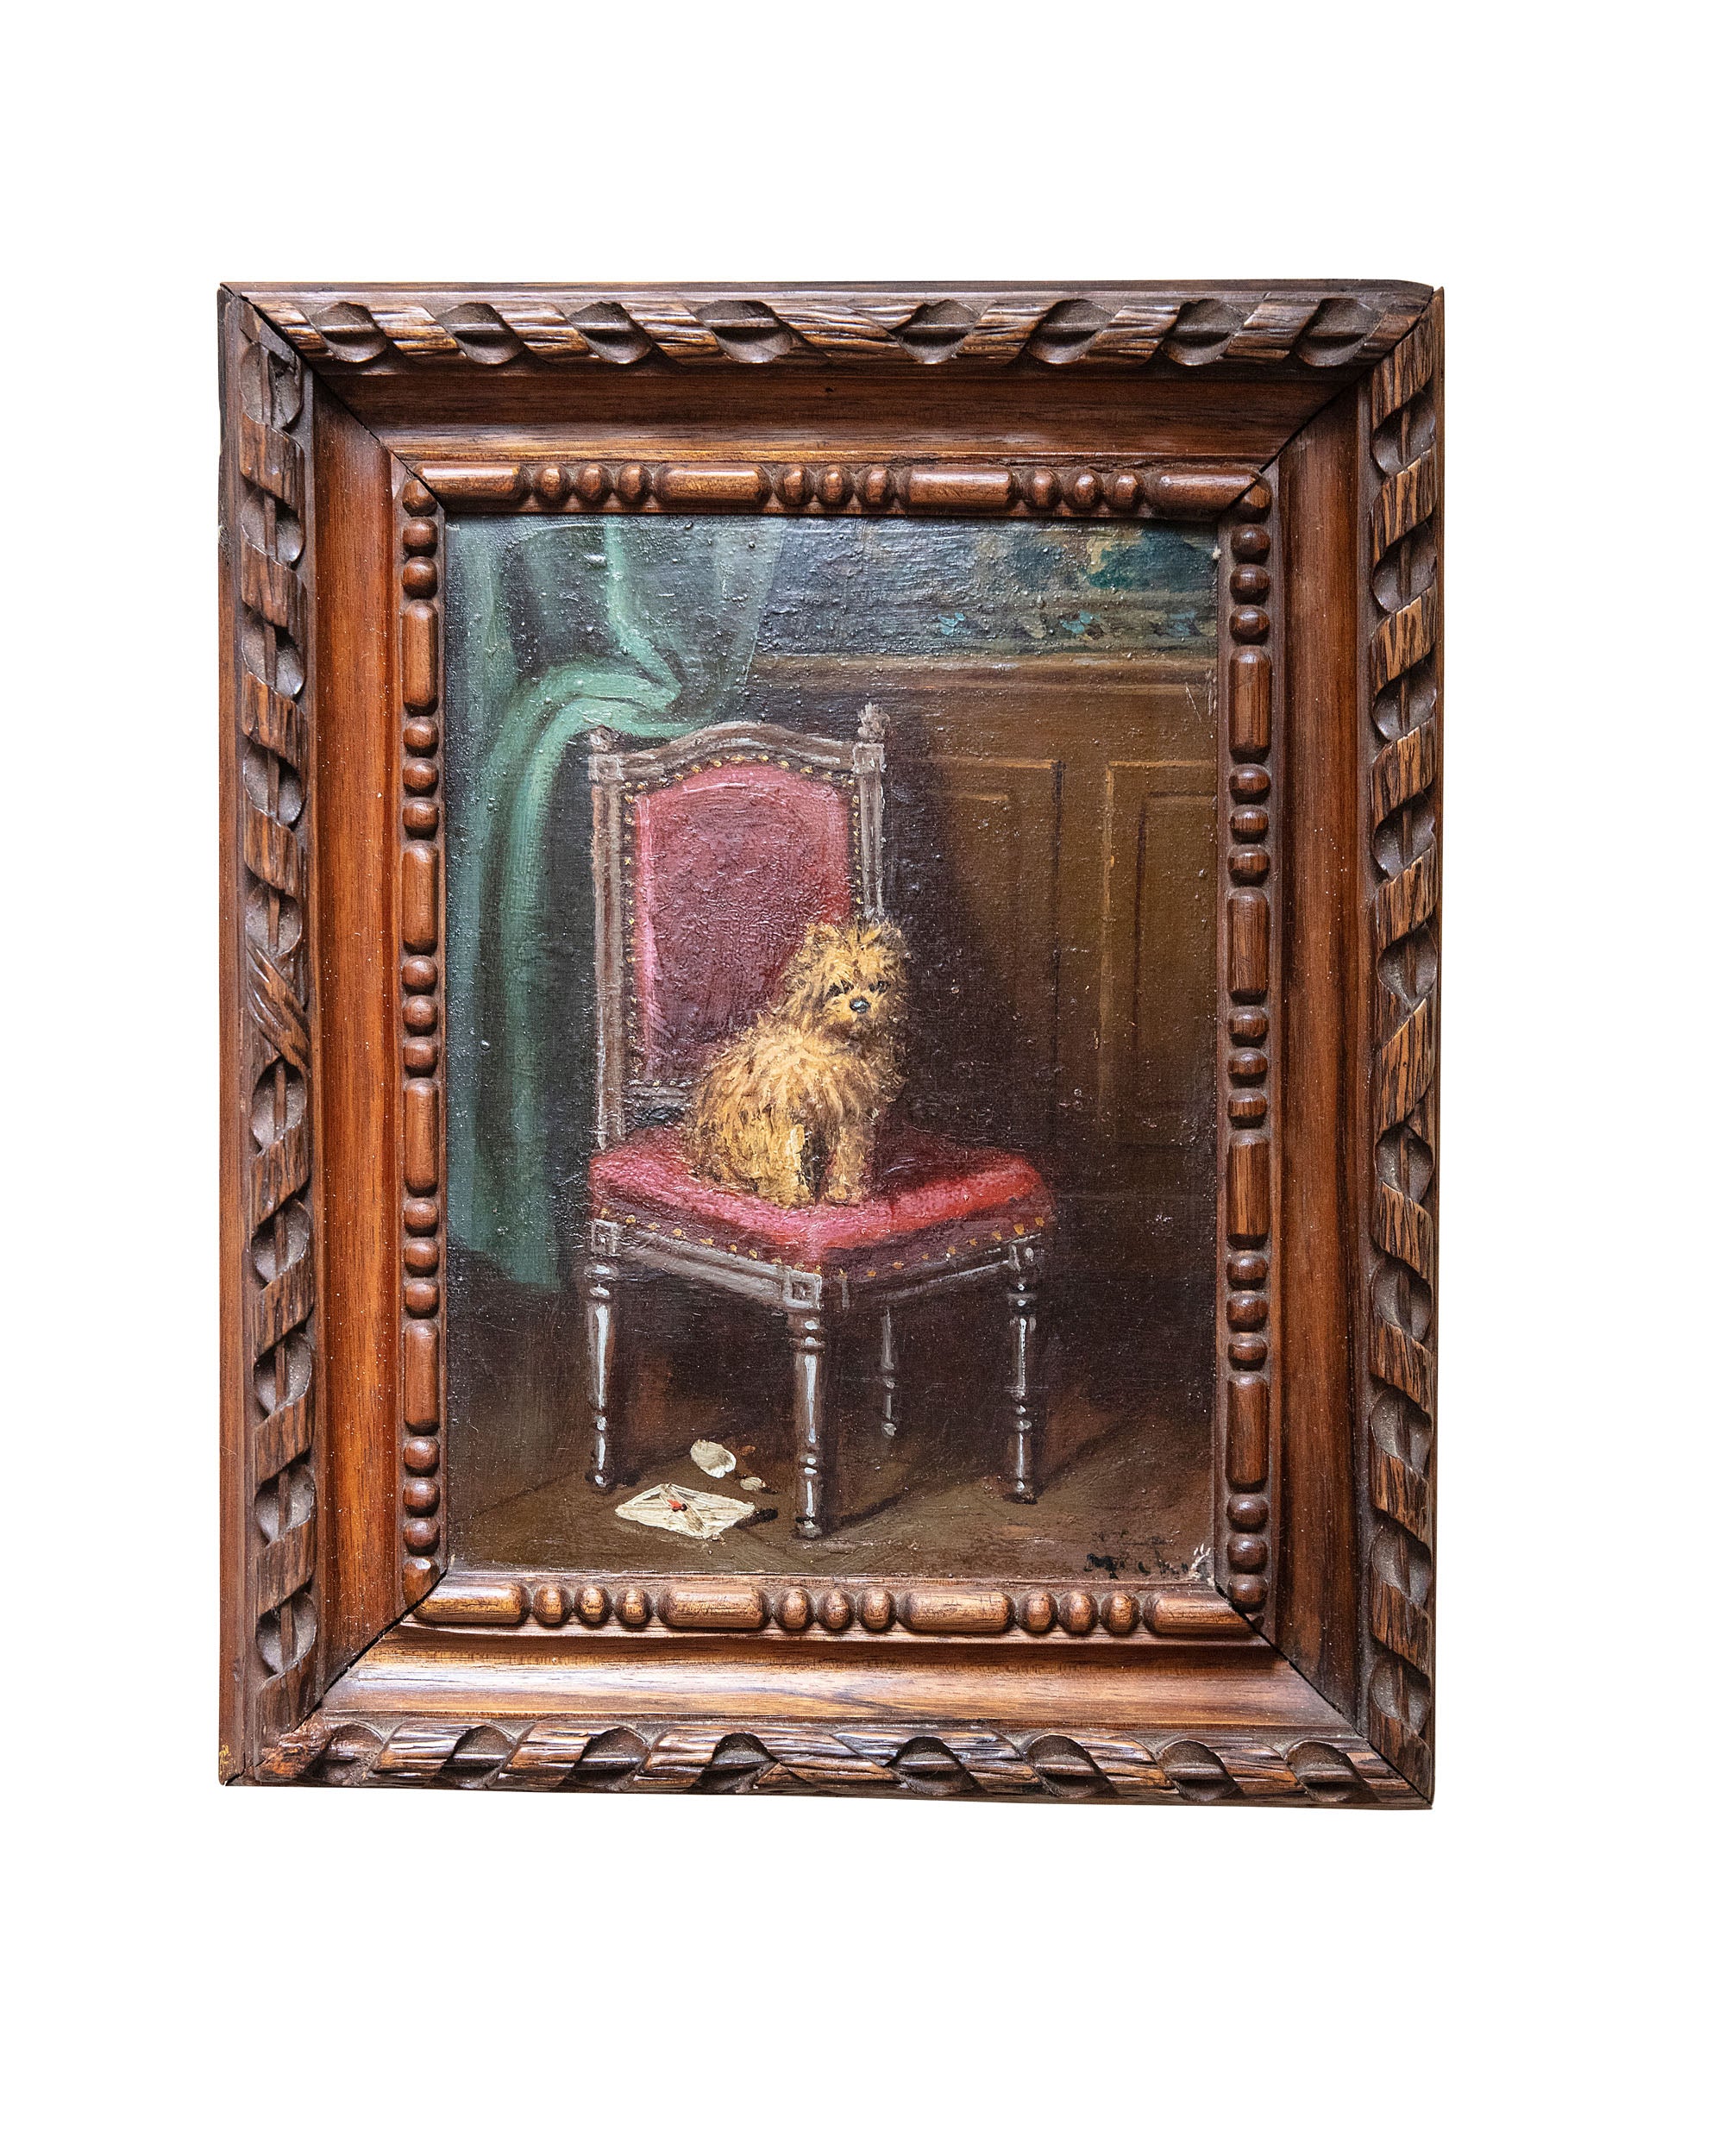 Oil painting on cardboard "Chien sur une chaise" with hand-carved wooden frame. XIX century